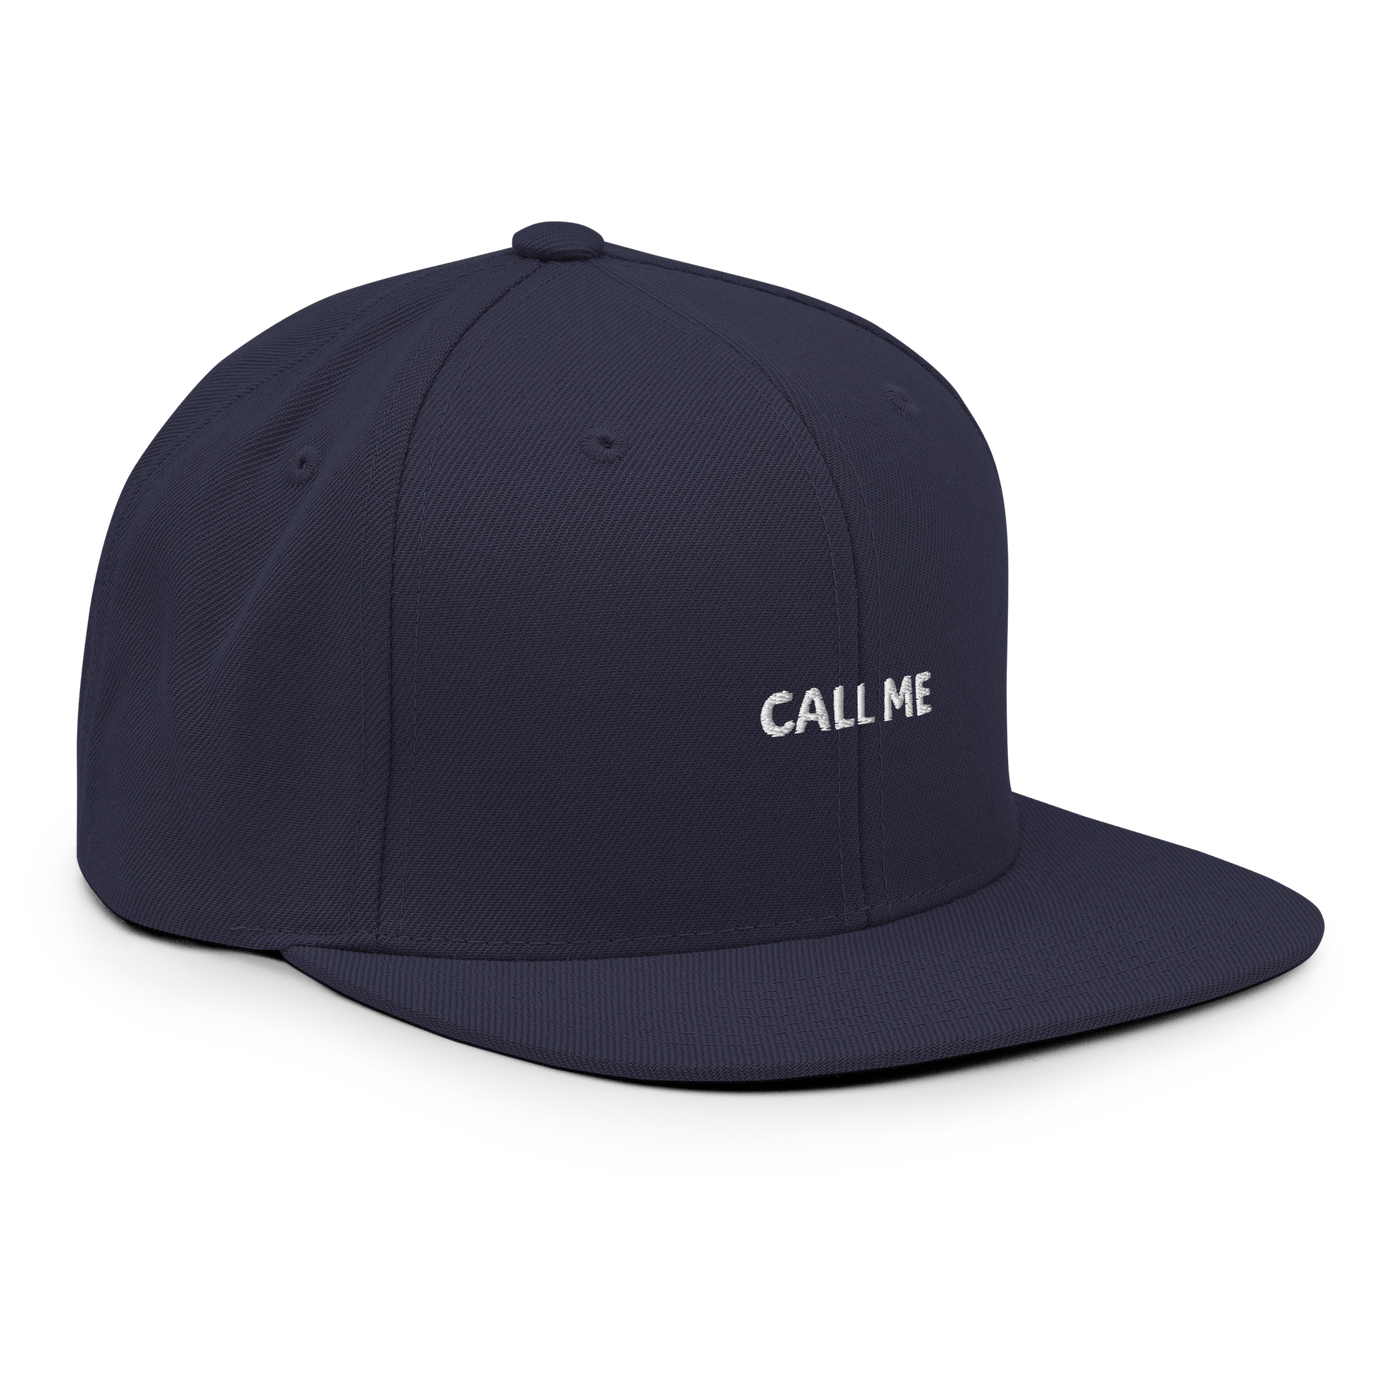 Call me Snapback - Navy - - Just Another Cap Store